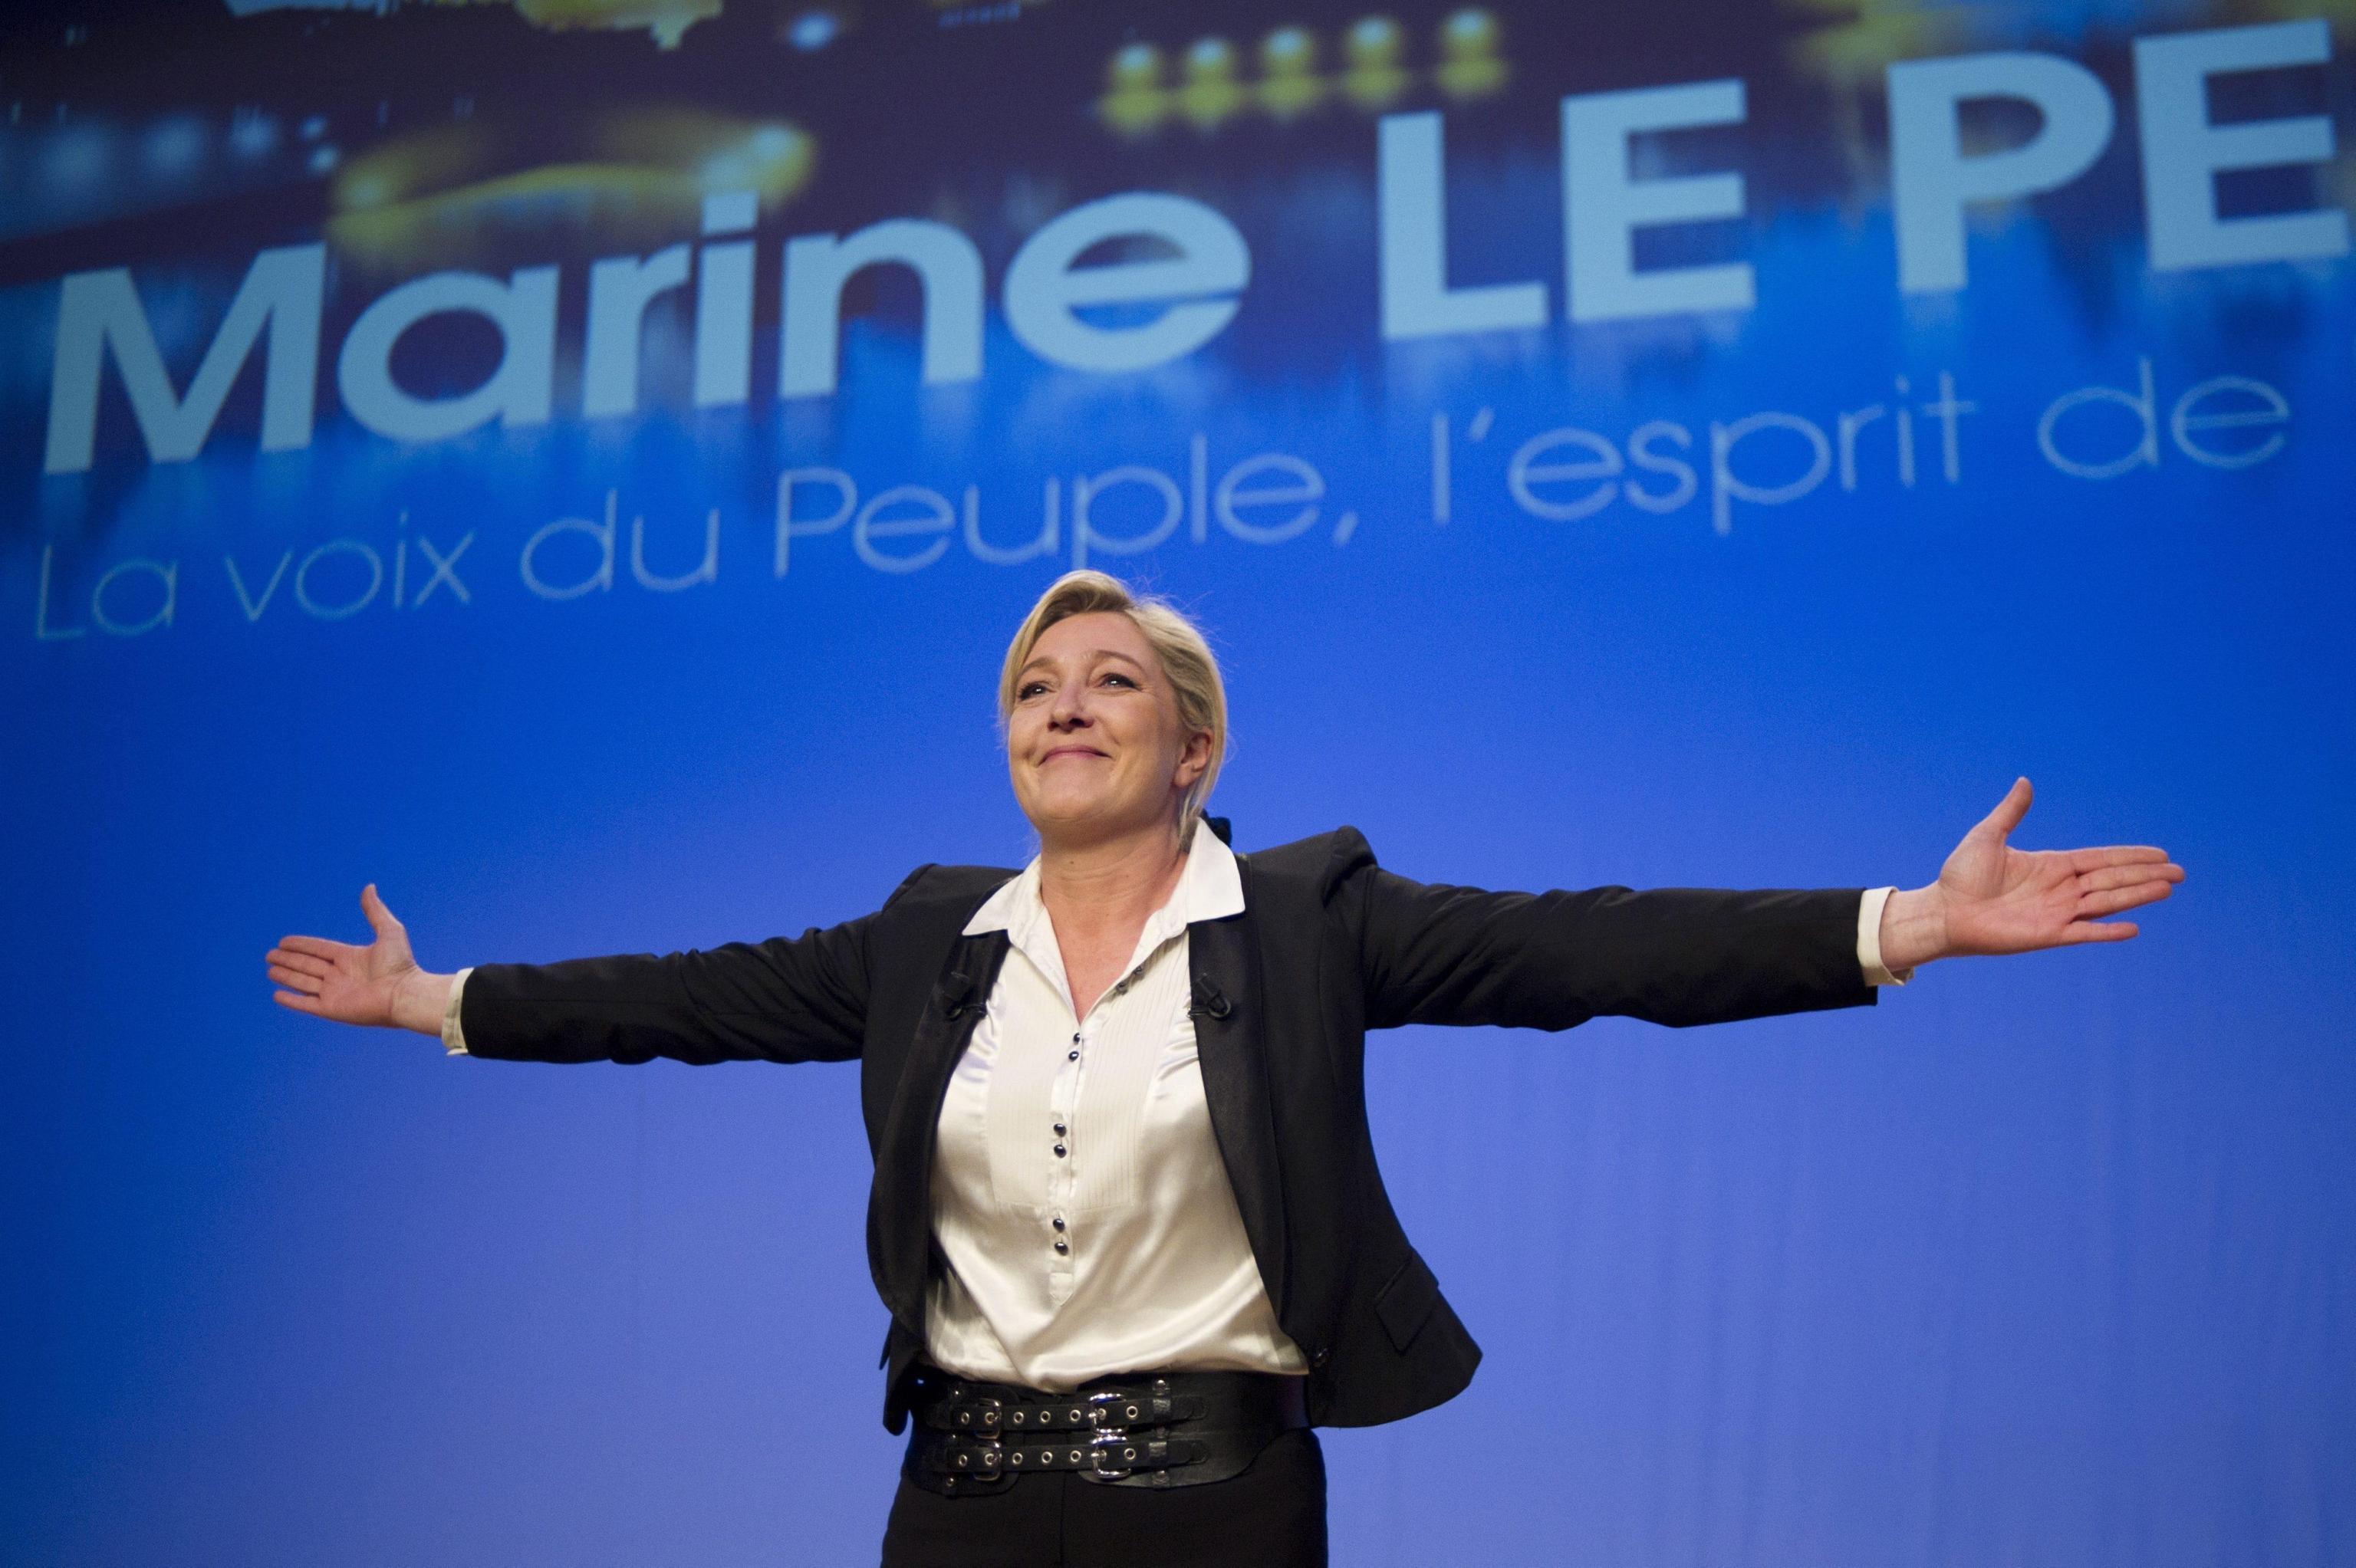 BREAKING: Marine Le Pen’s party leads in French regional elections